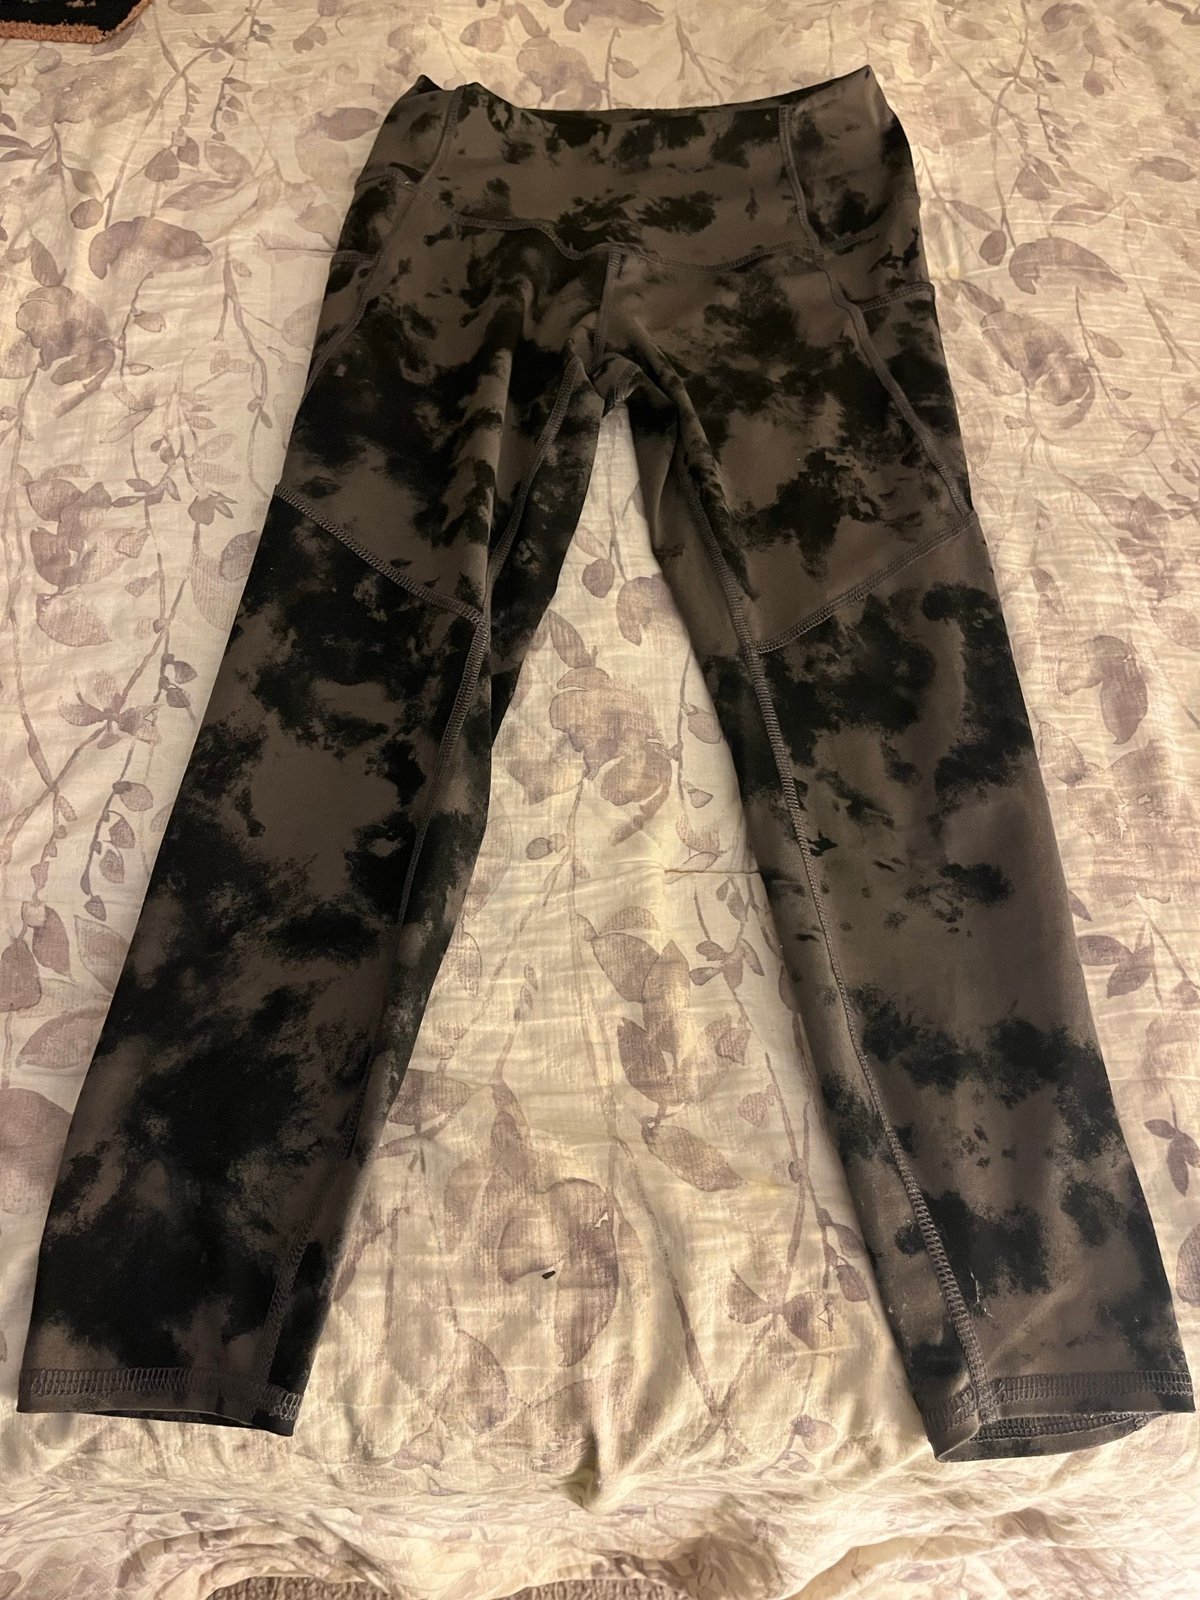 floor price leggings Nxp4pW3aW Outlet Store